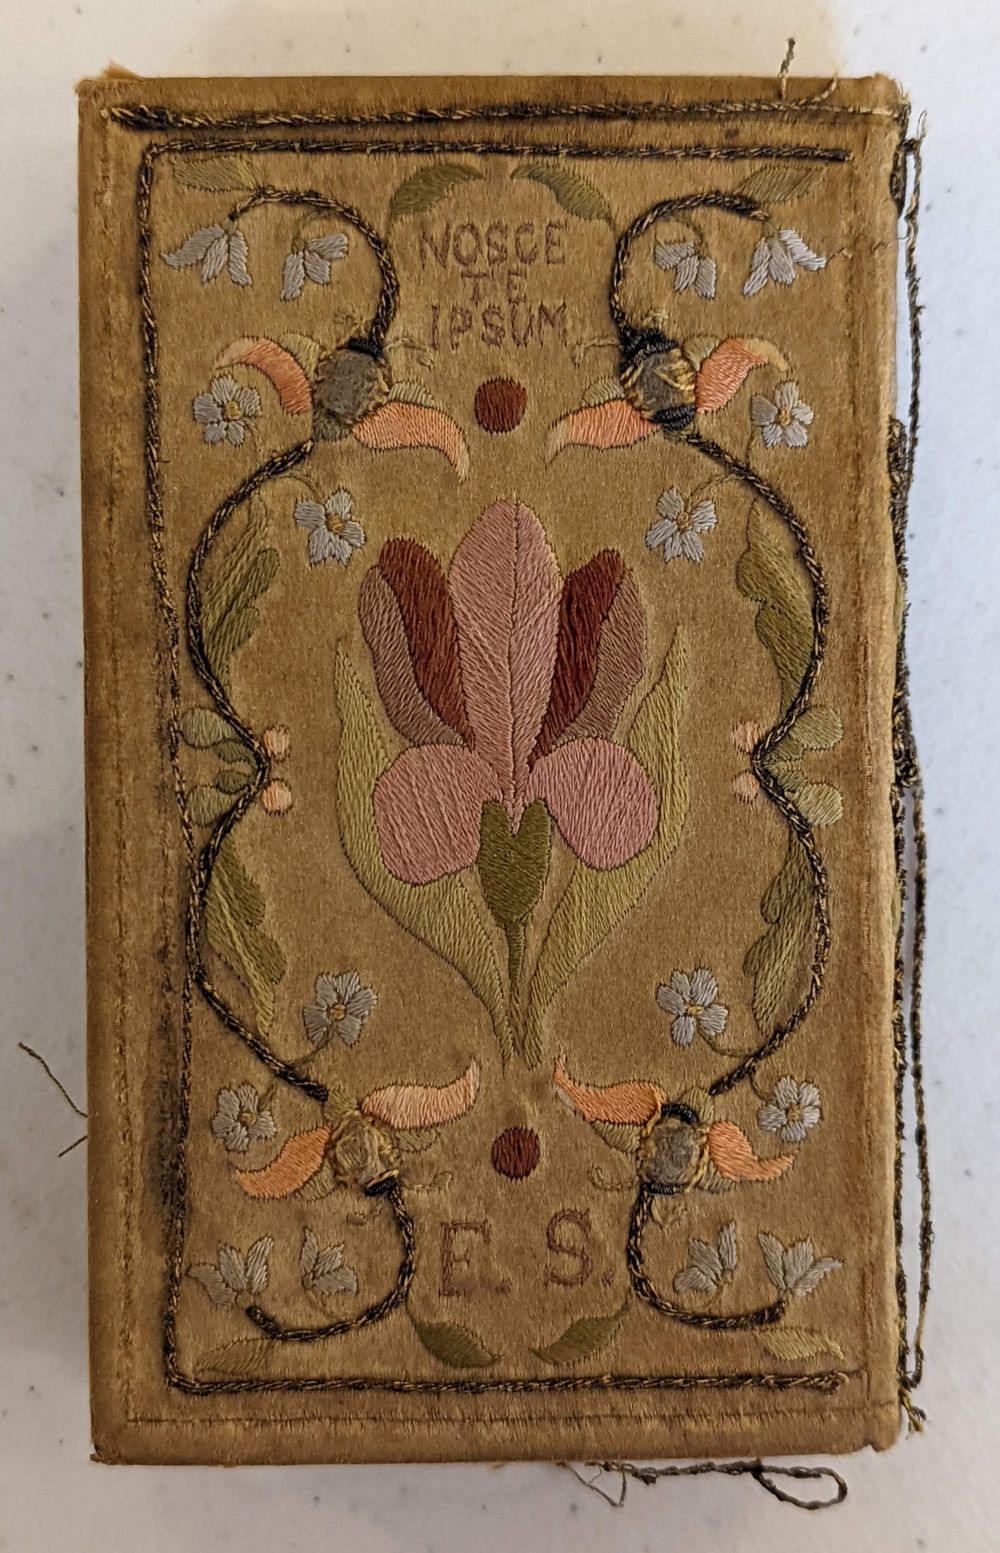 Embroidered binding. The Holy Bible, Oxford University Press, circa 1895 - Image 12 of 17